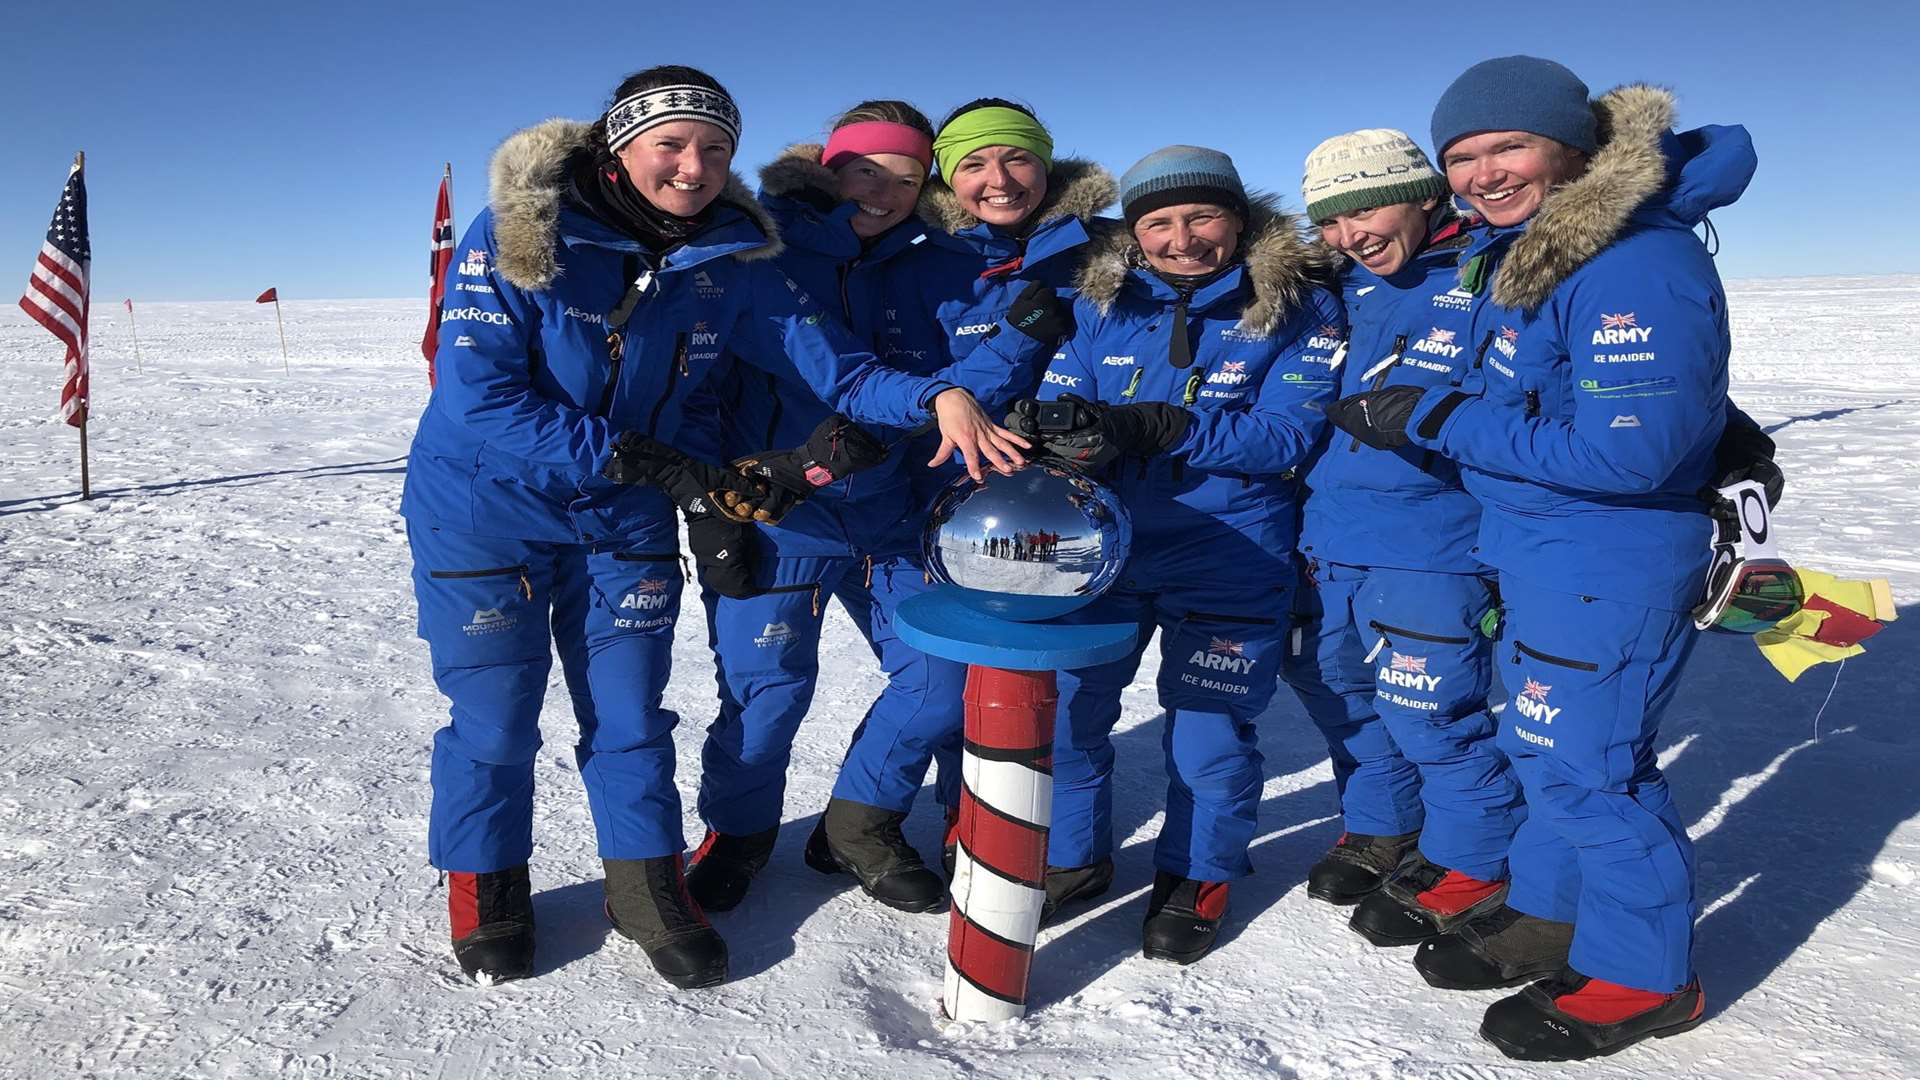 The group touching the silver globe at the South Pole